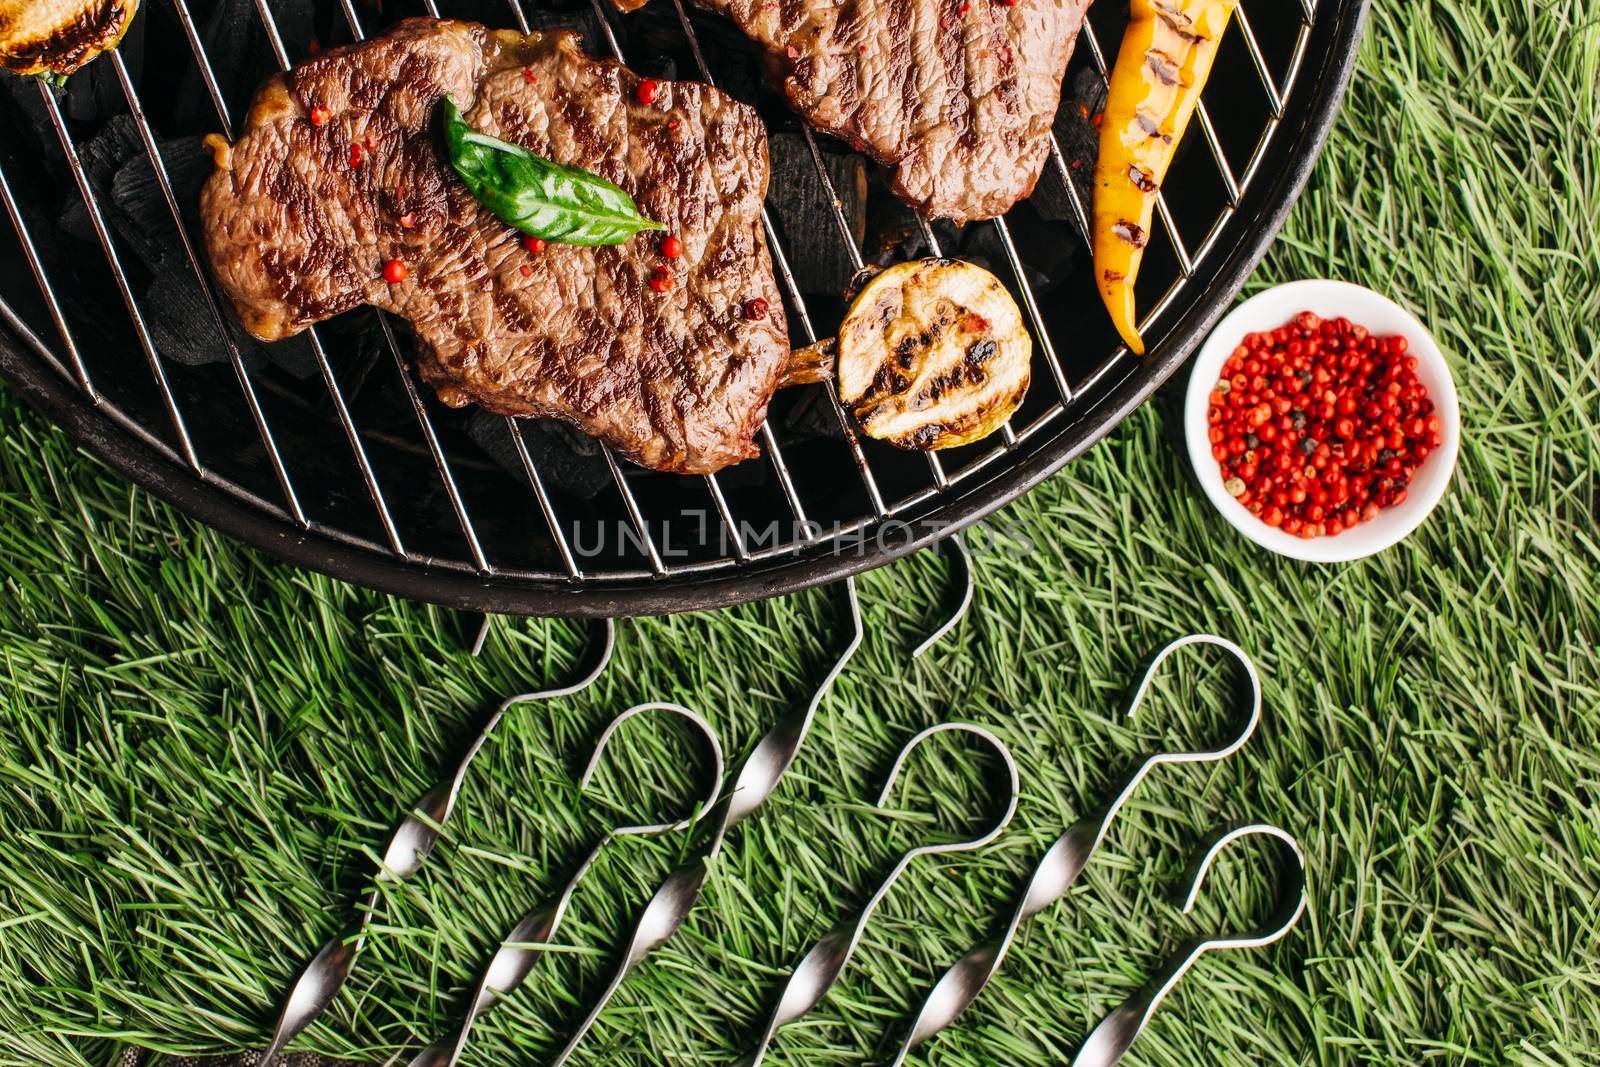 grilled steak vegetable with metallic skewer barbecue grill green grass background by Zahard